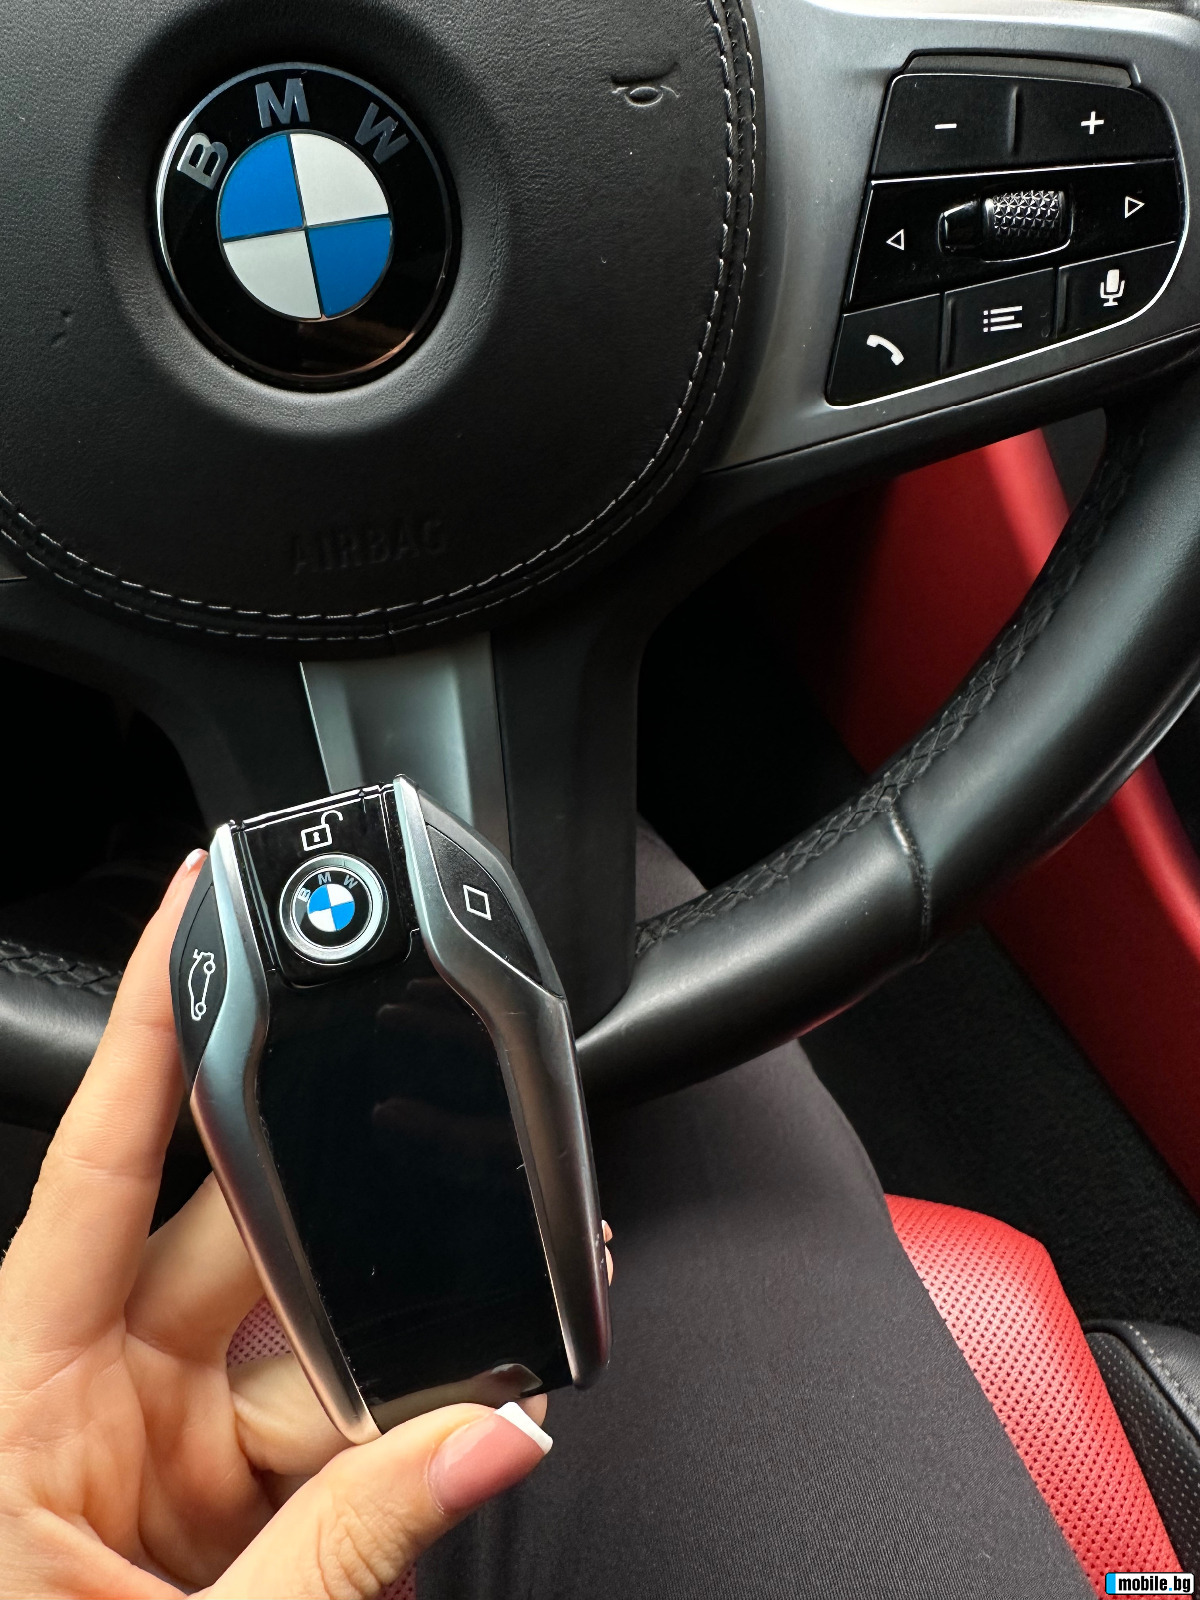 BMW 850 i xDrive BOWERS&WILKINS/ LASER / PANORAMA/ Head up | Mobile.bg   9